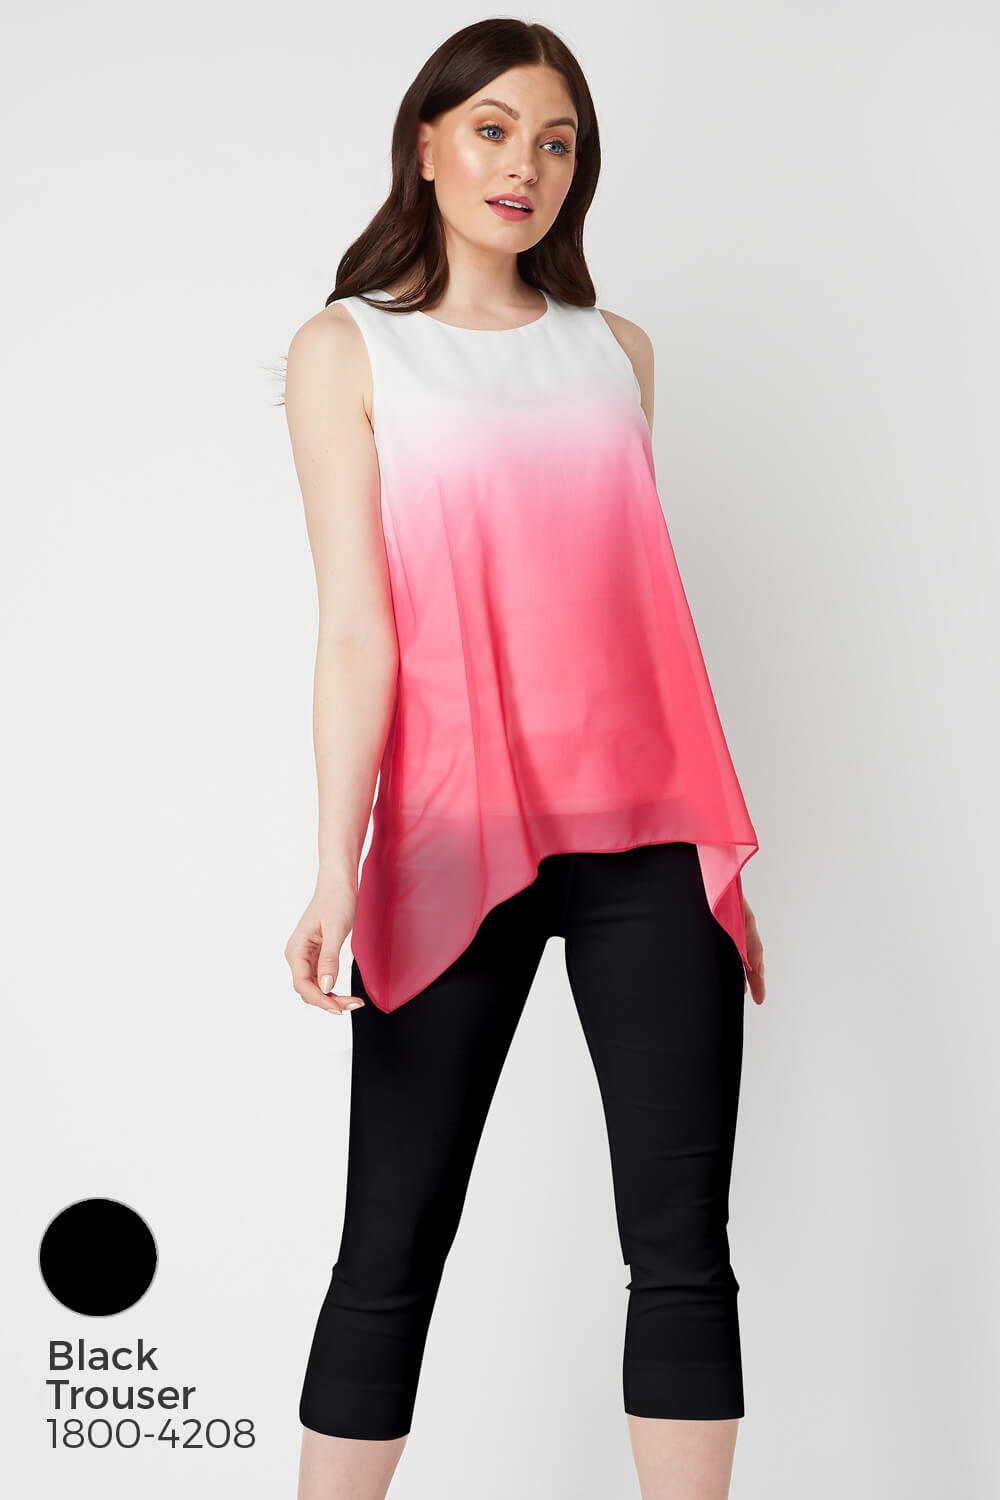 PINK Ombre Print Overlay Top, Image 5 of 8